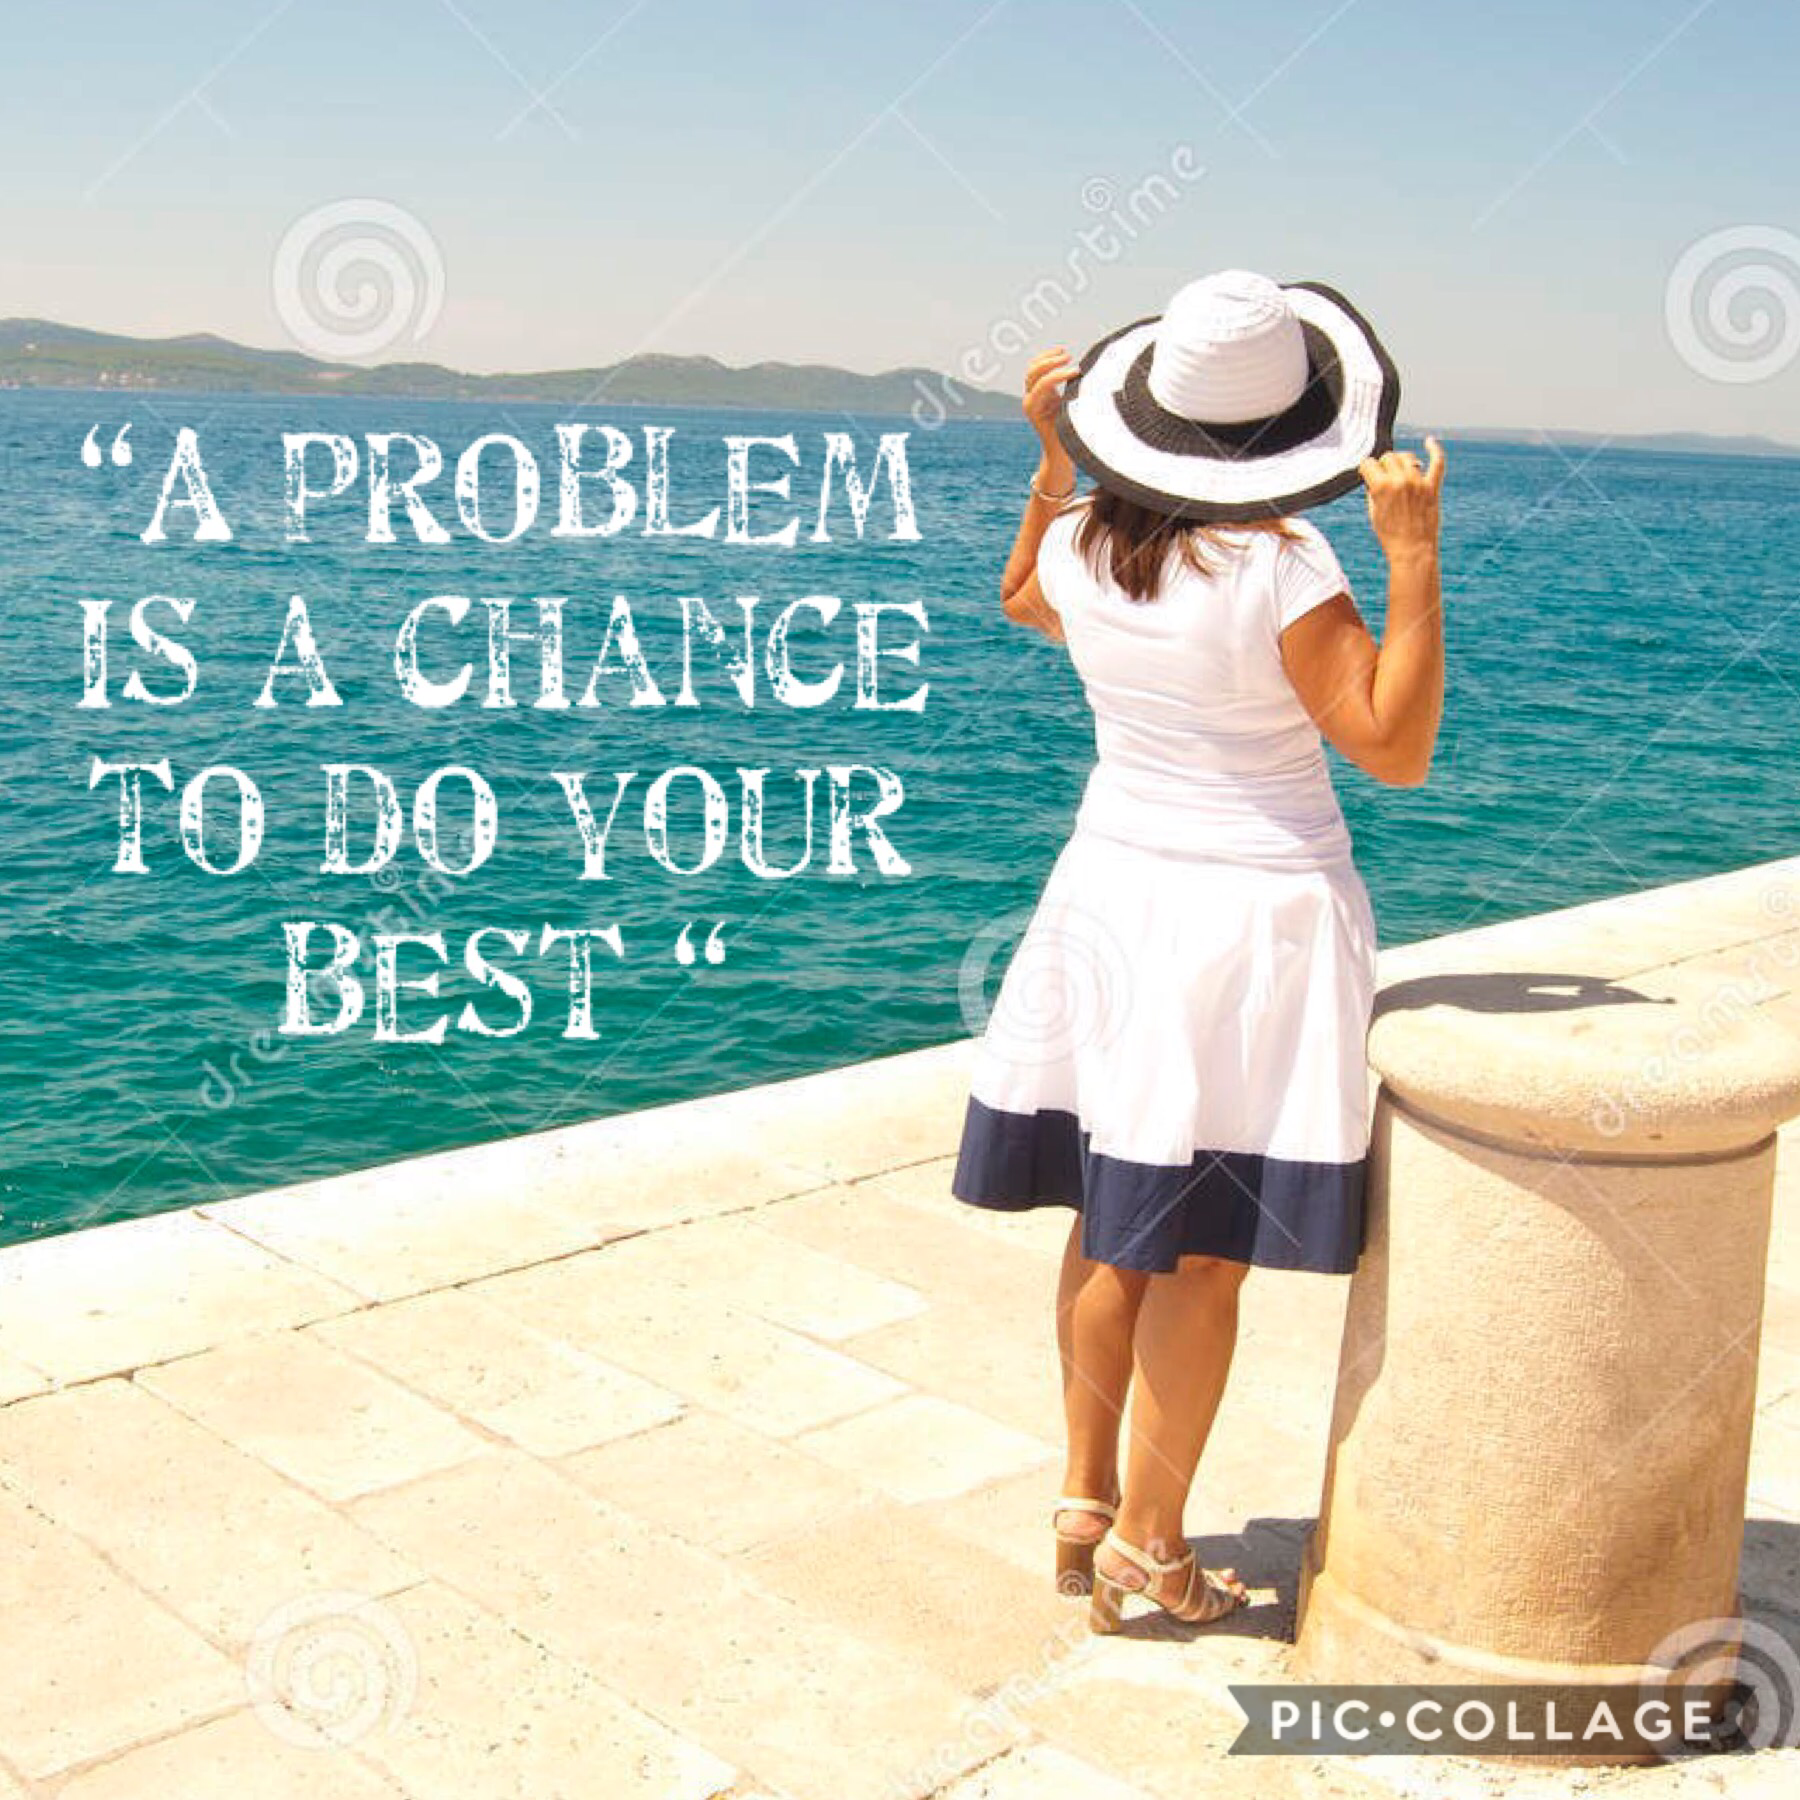 “ a problem is a chance to do your best”